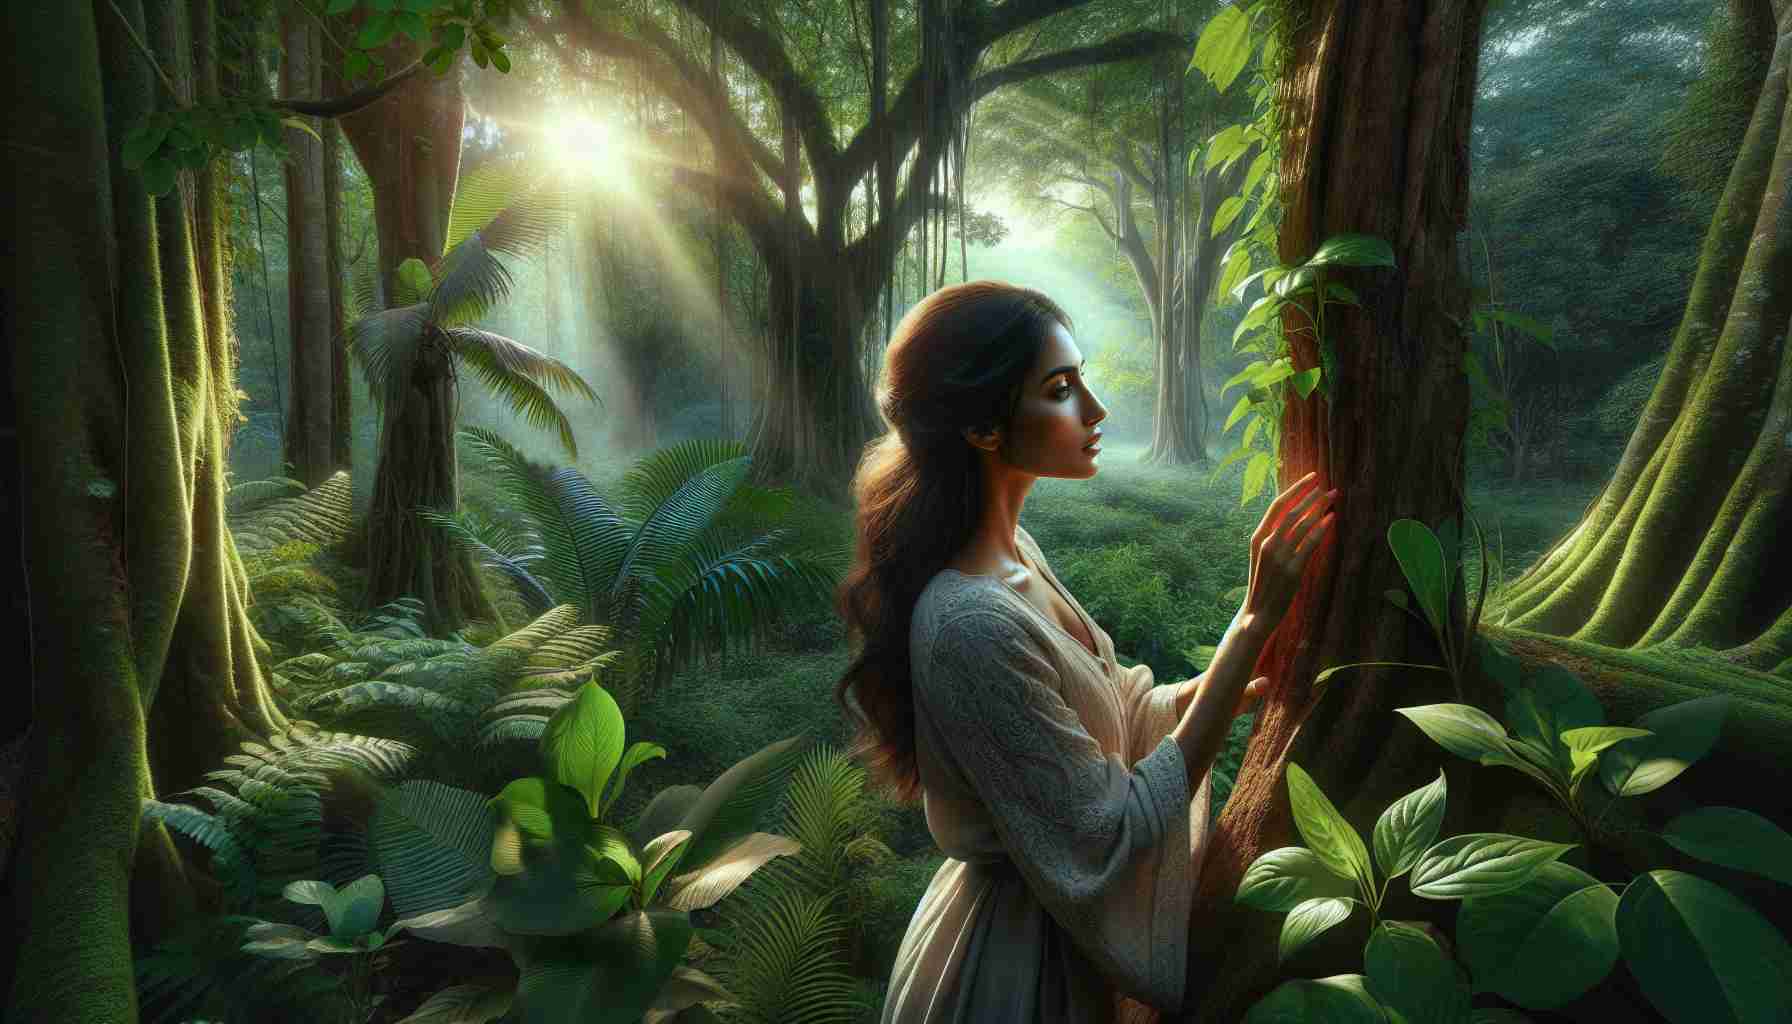 A high-definition, realistic image showcasing the beauty of nature. This scene includes a South Asian woman, who we'll refer to as Amita, fully engrossed in the tranquility around her. She is standing amidst a lush green forest, captivated by the variety of plant life. The sun's rays peek through the leaves of the trees, casting an ethereal glow on her face. In the background, there's a symphony of chirping birds and rustling leaves. Amita is touching a tree bark with one hand, a symbol of her deep connection with nature. Her face exudes serenity and peace.